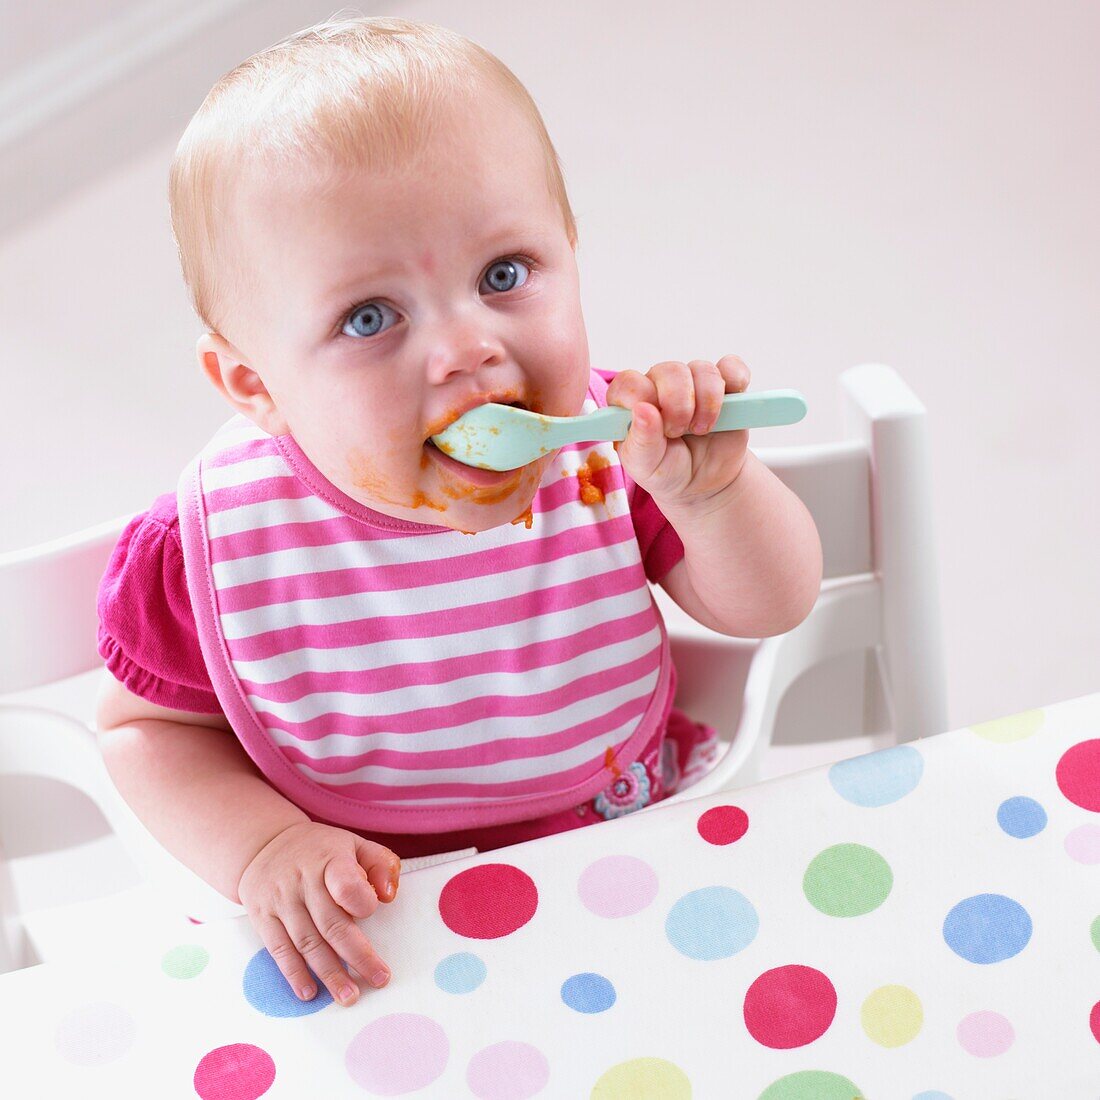 Baby girl holding spoon to mouth